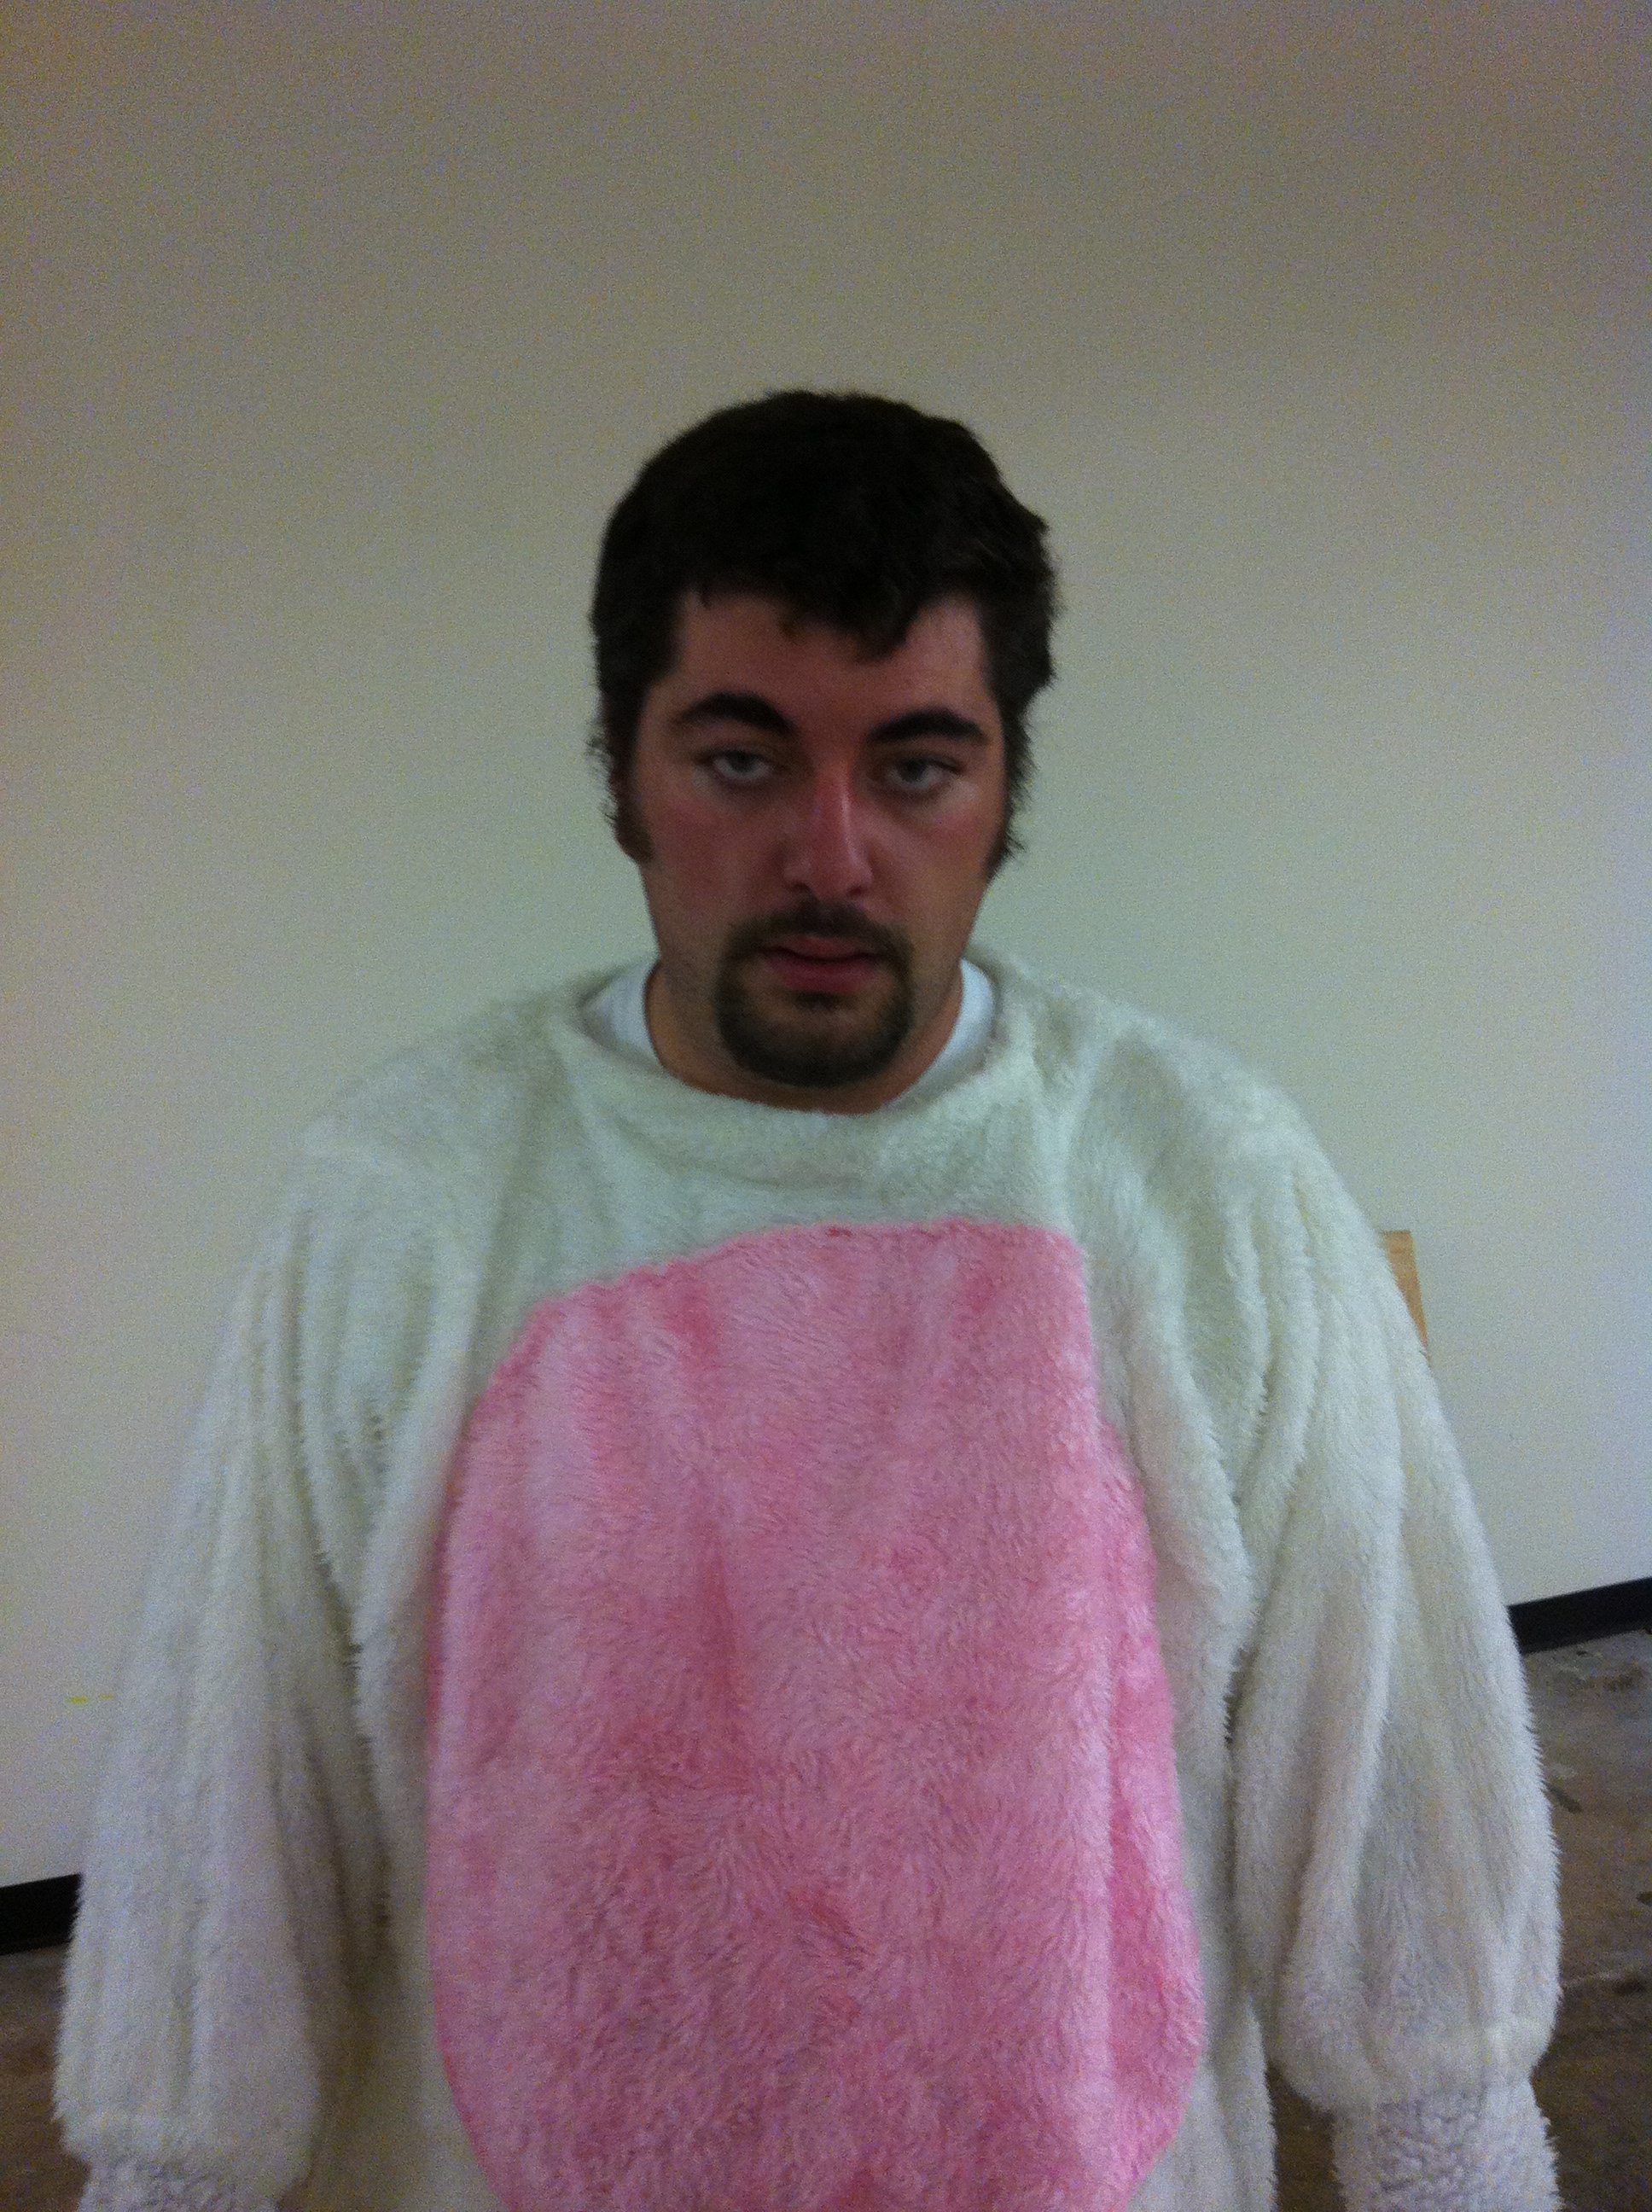 This was after the 3 hours of being in the Bunny Suit! It was horrible!!